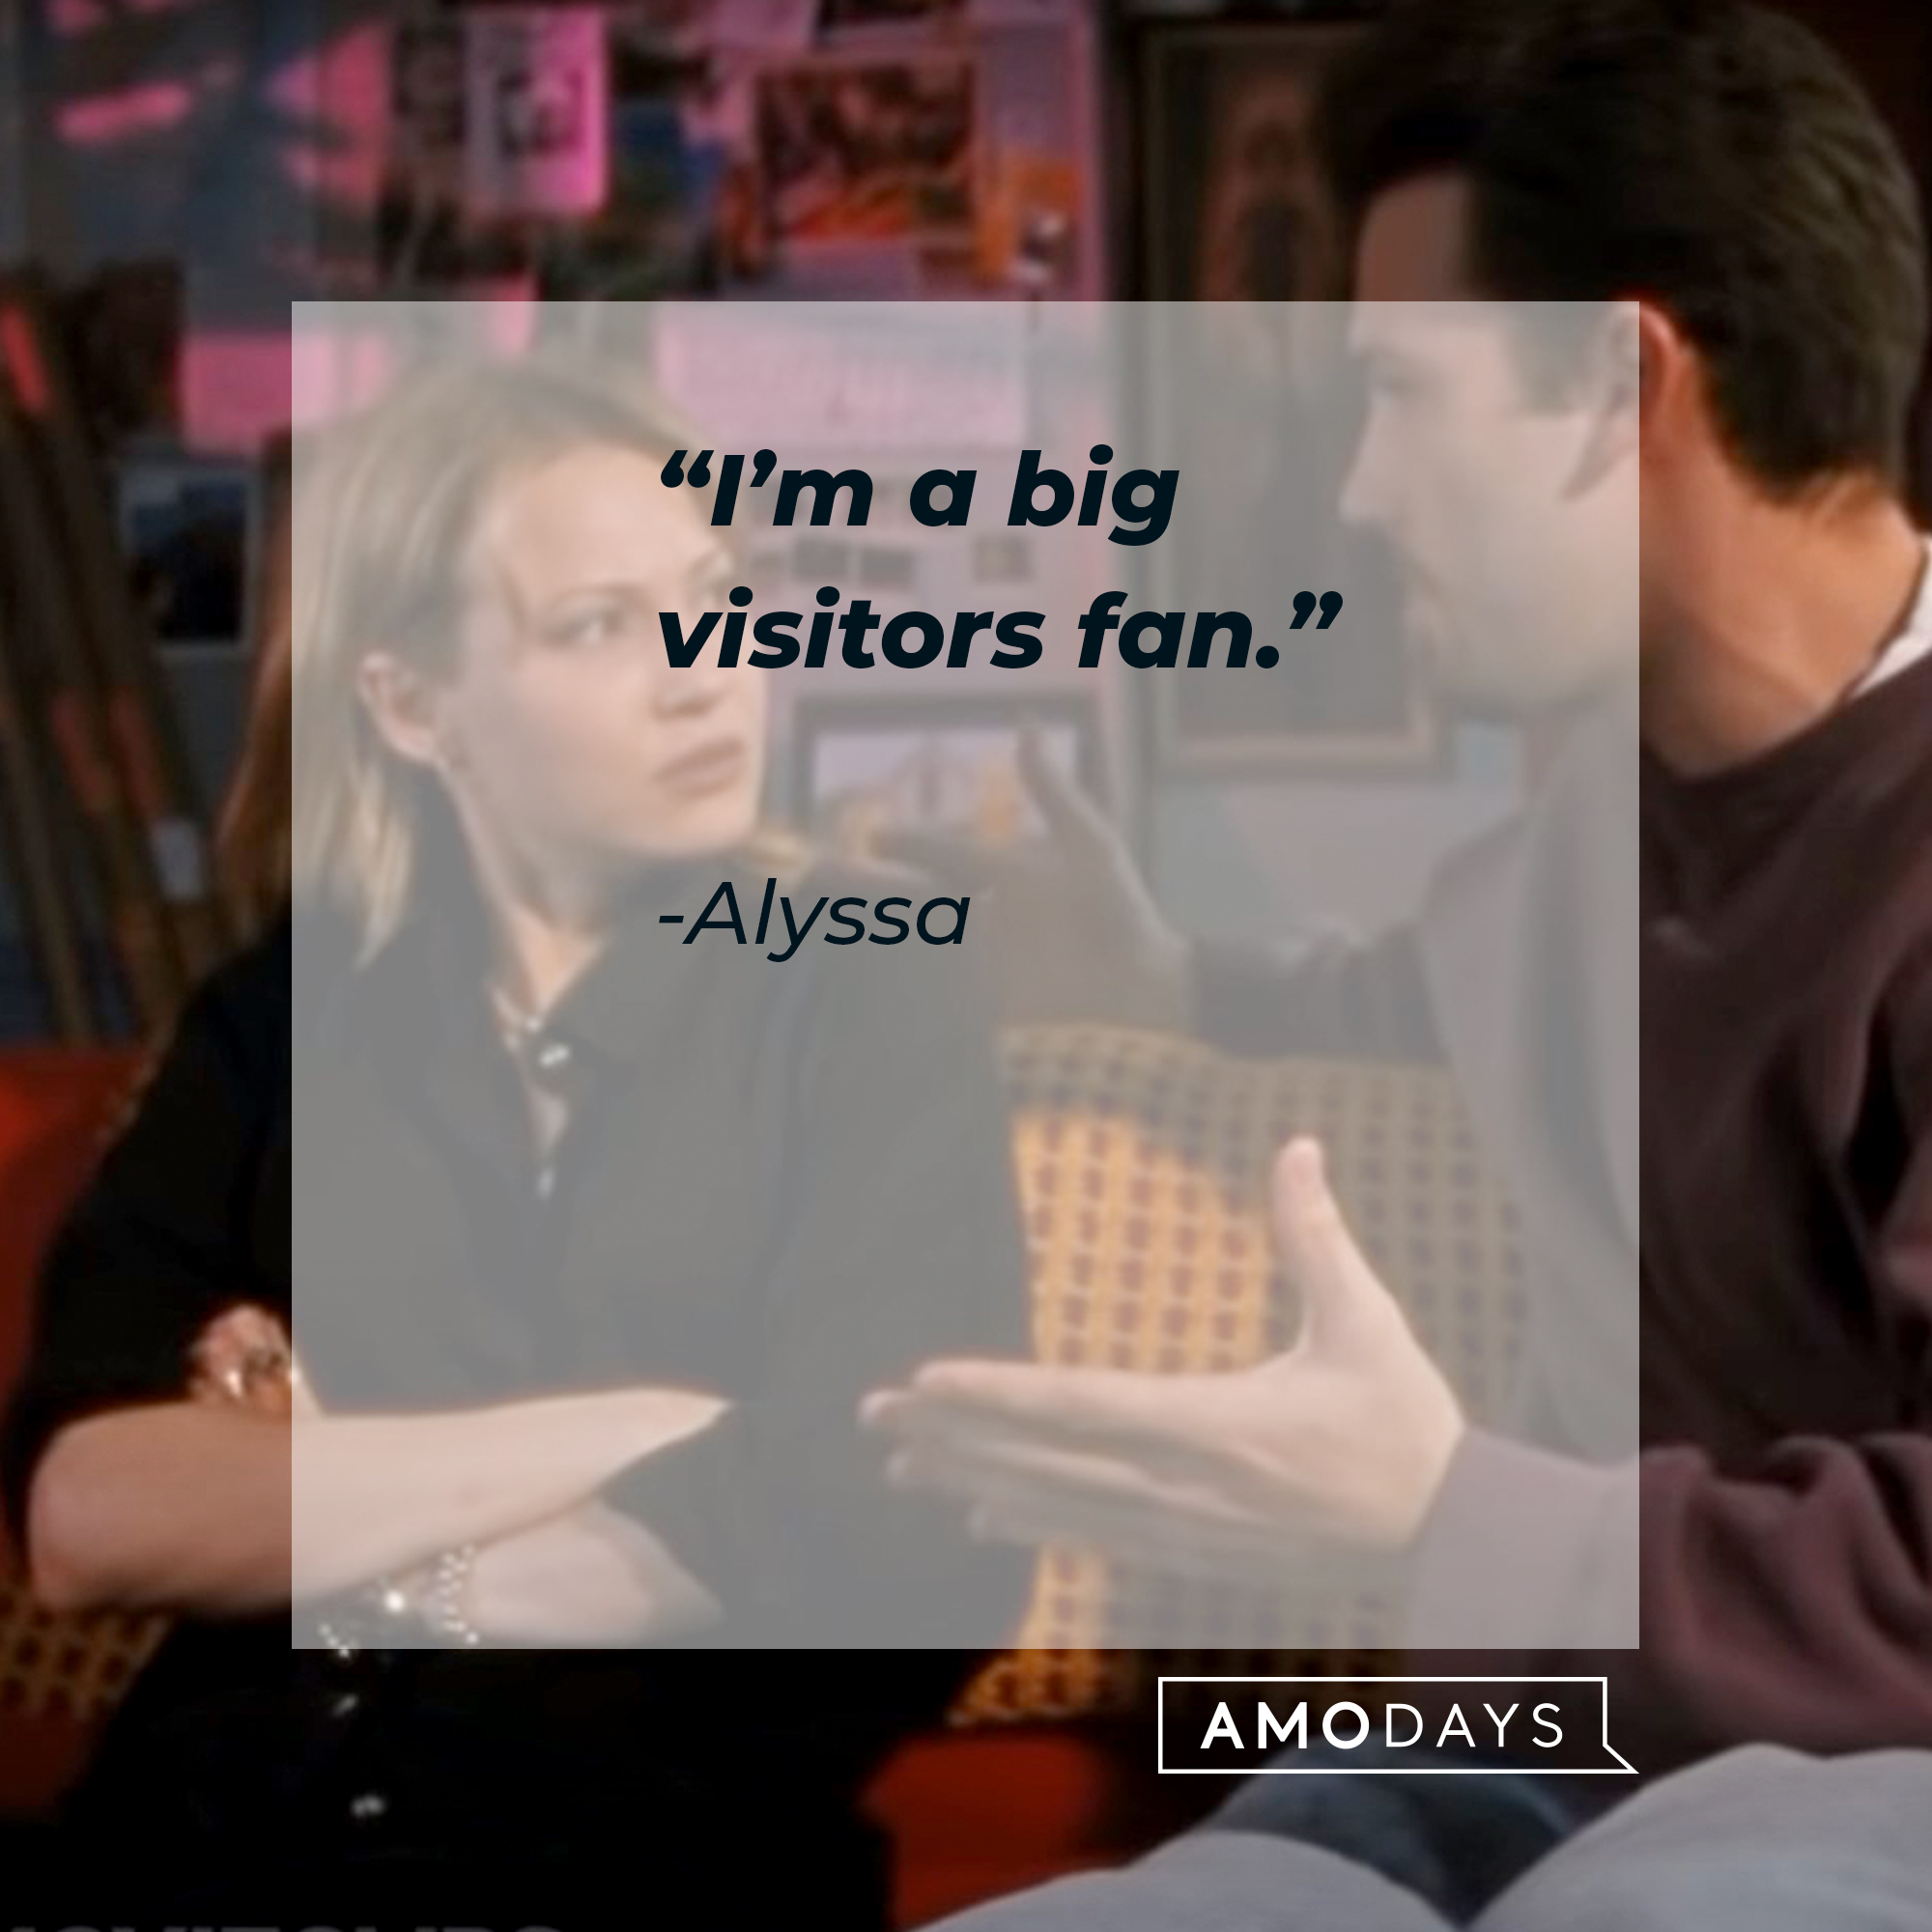 Holden and Alyssa, with her quote: “I’m a big visitors fan.” | Source: facebook.com/ChasingAmyMovie